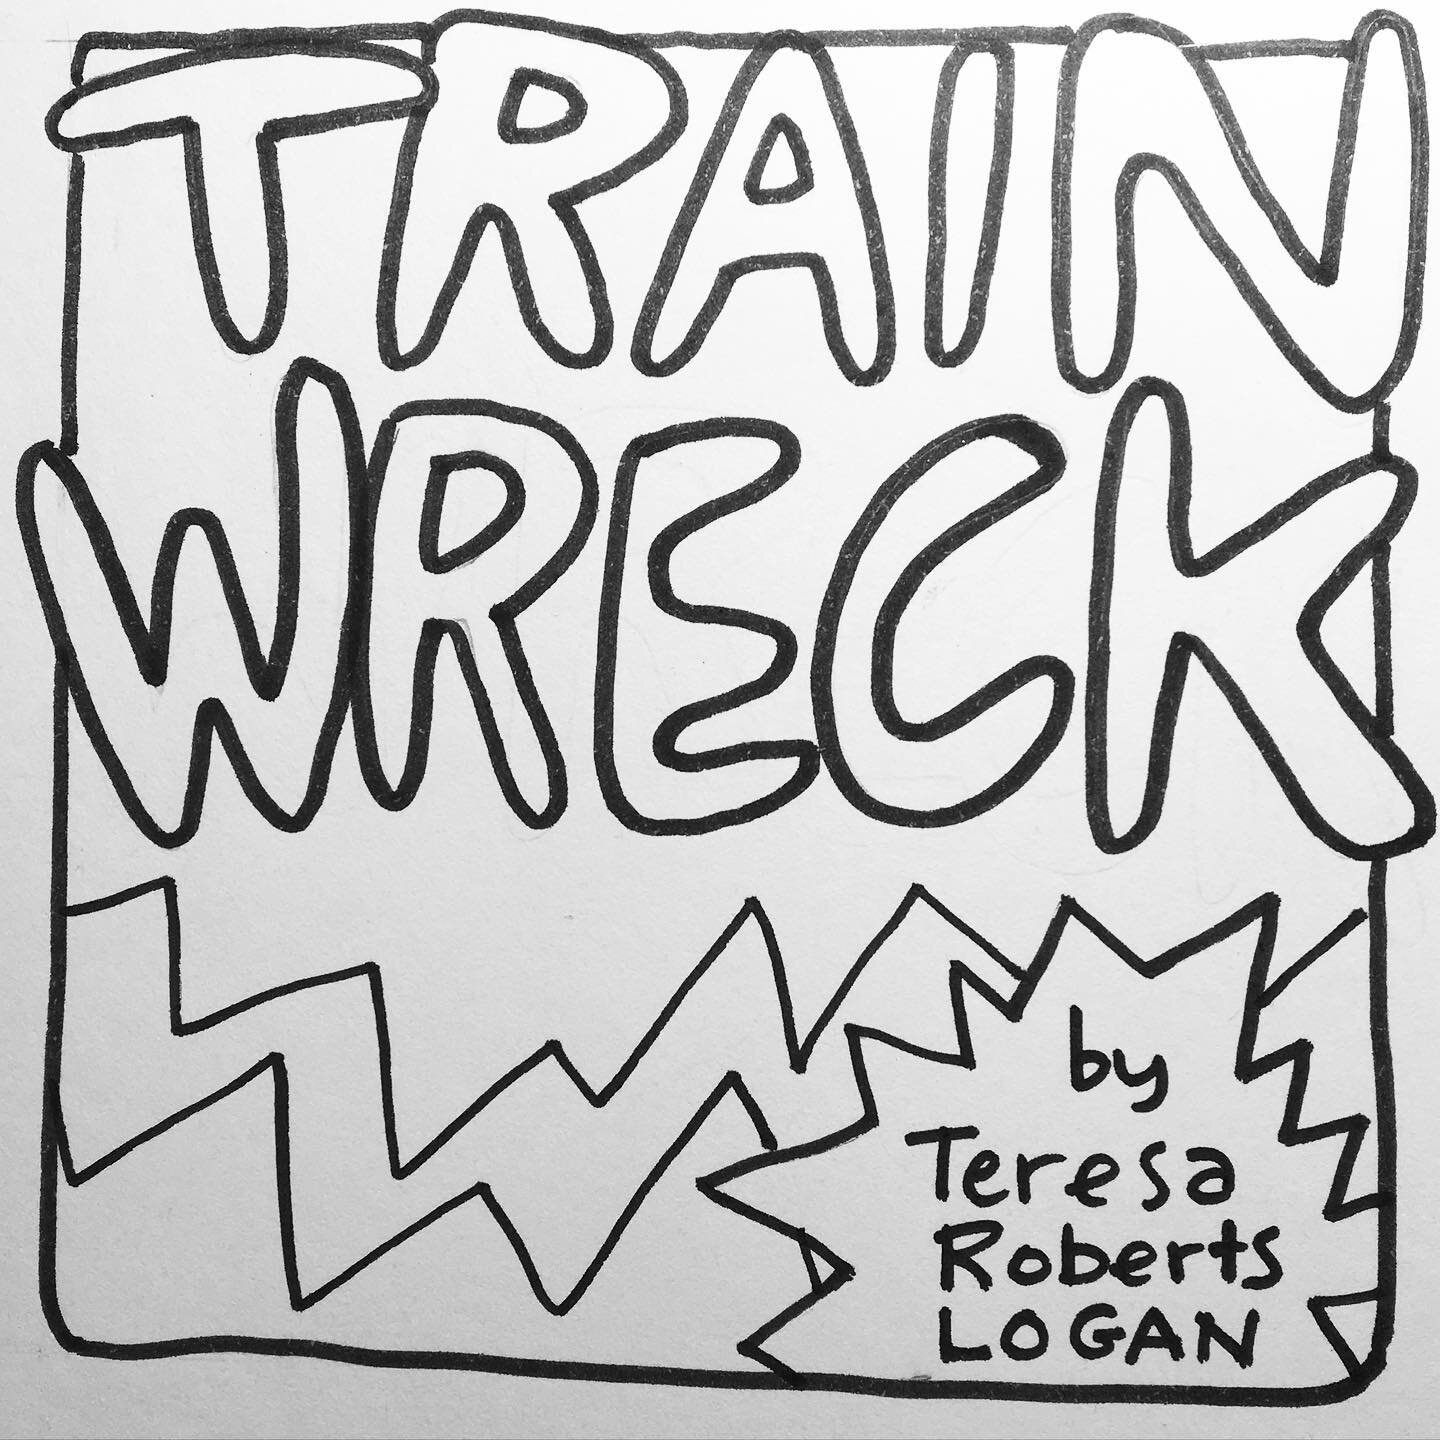 Yes, I was in an actual train wreck! (With no voice!)

#comics #autobiocomics #trainwreck #dc #dcstories #visualstorytelling #comics #visualstoryteller #diarycomics #storytelling #storyteller